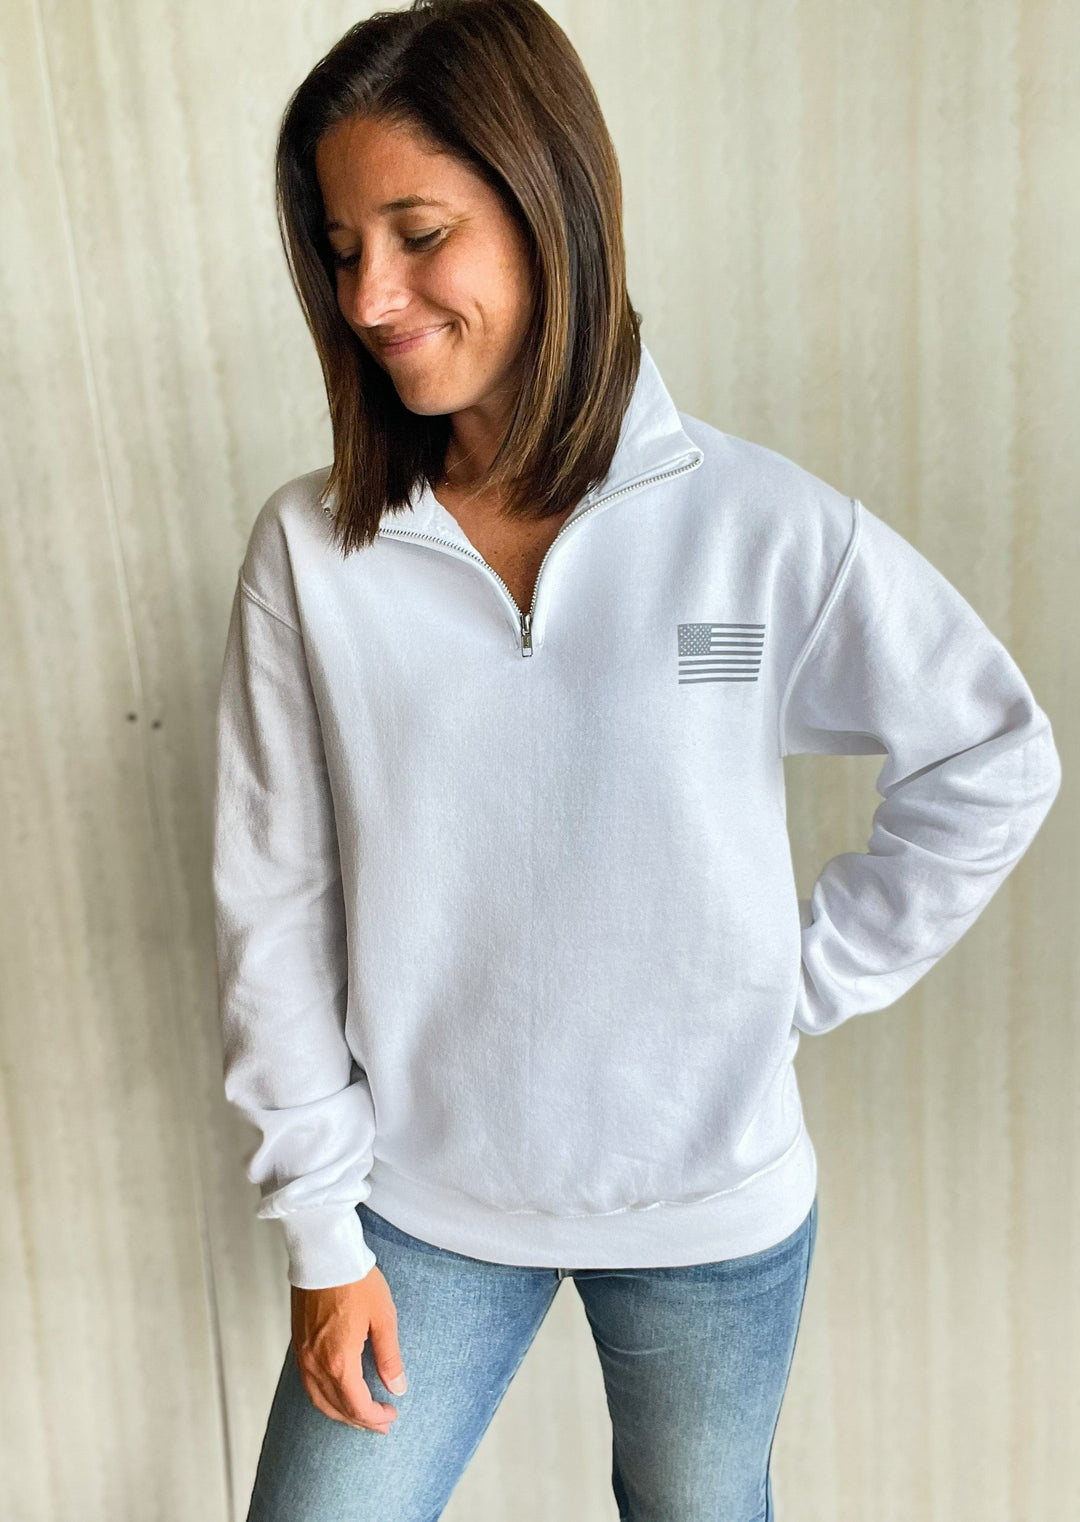 White 1/4 Mock Quarter Zip Sweatshirt with Gray American flag and "Land of the Free, United States of America, EST 1776" text. 